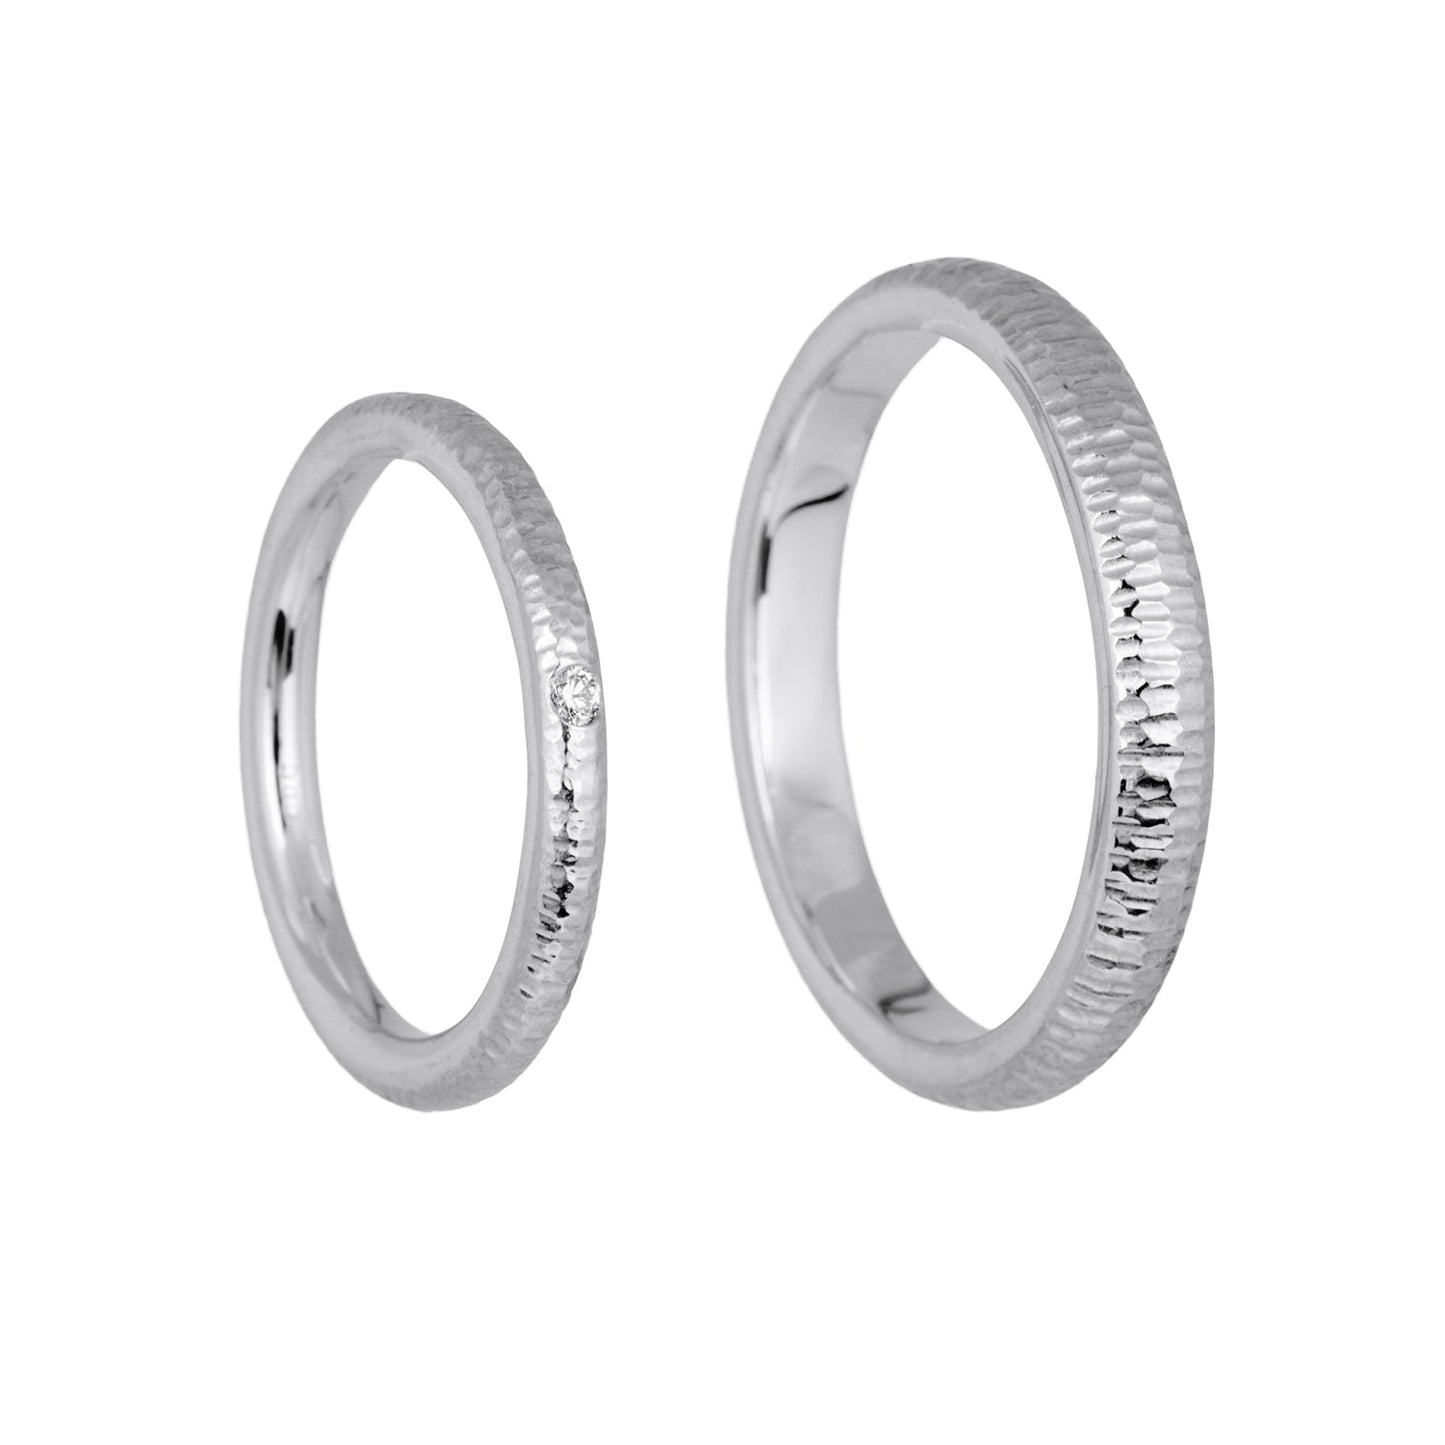 Classy 14 kt white gold wedding ring, side view.